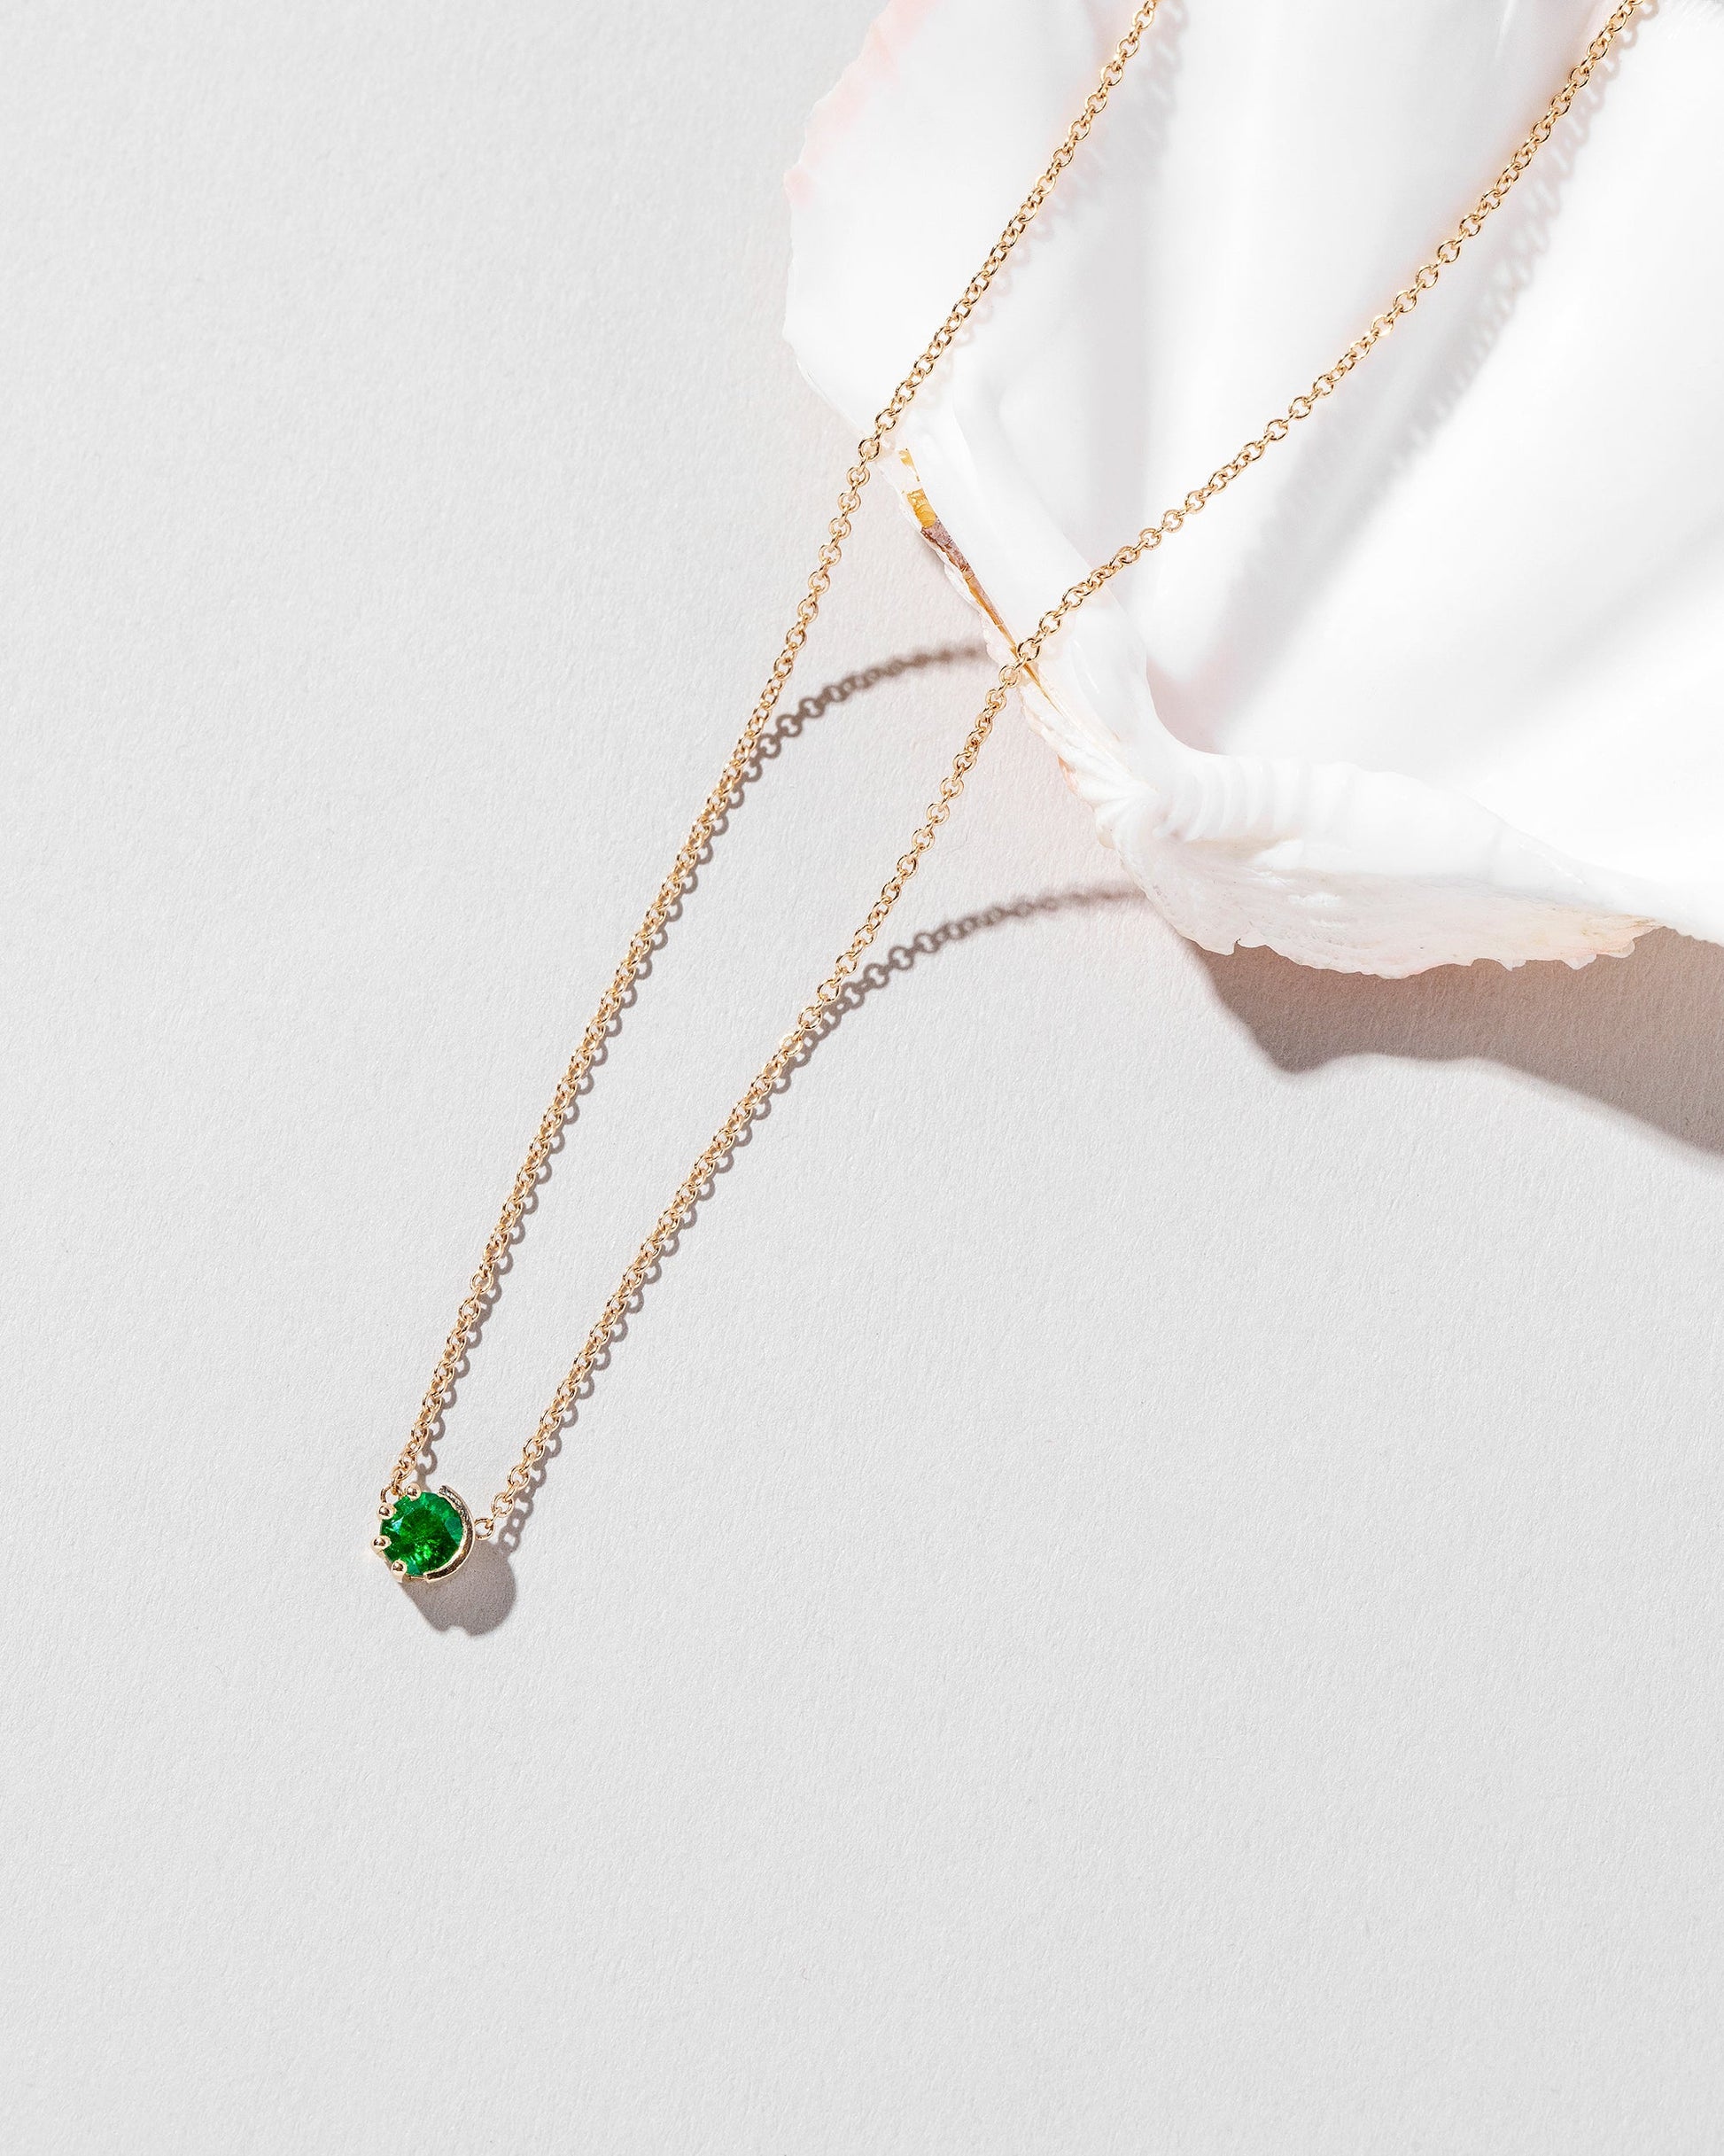 Styled image of the Emerald Sun & Moon Necklace.